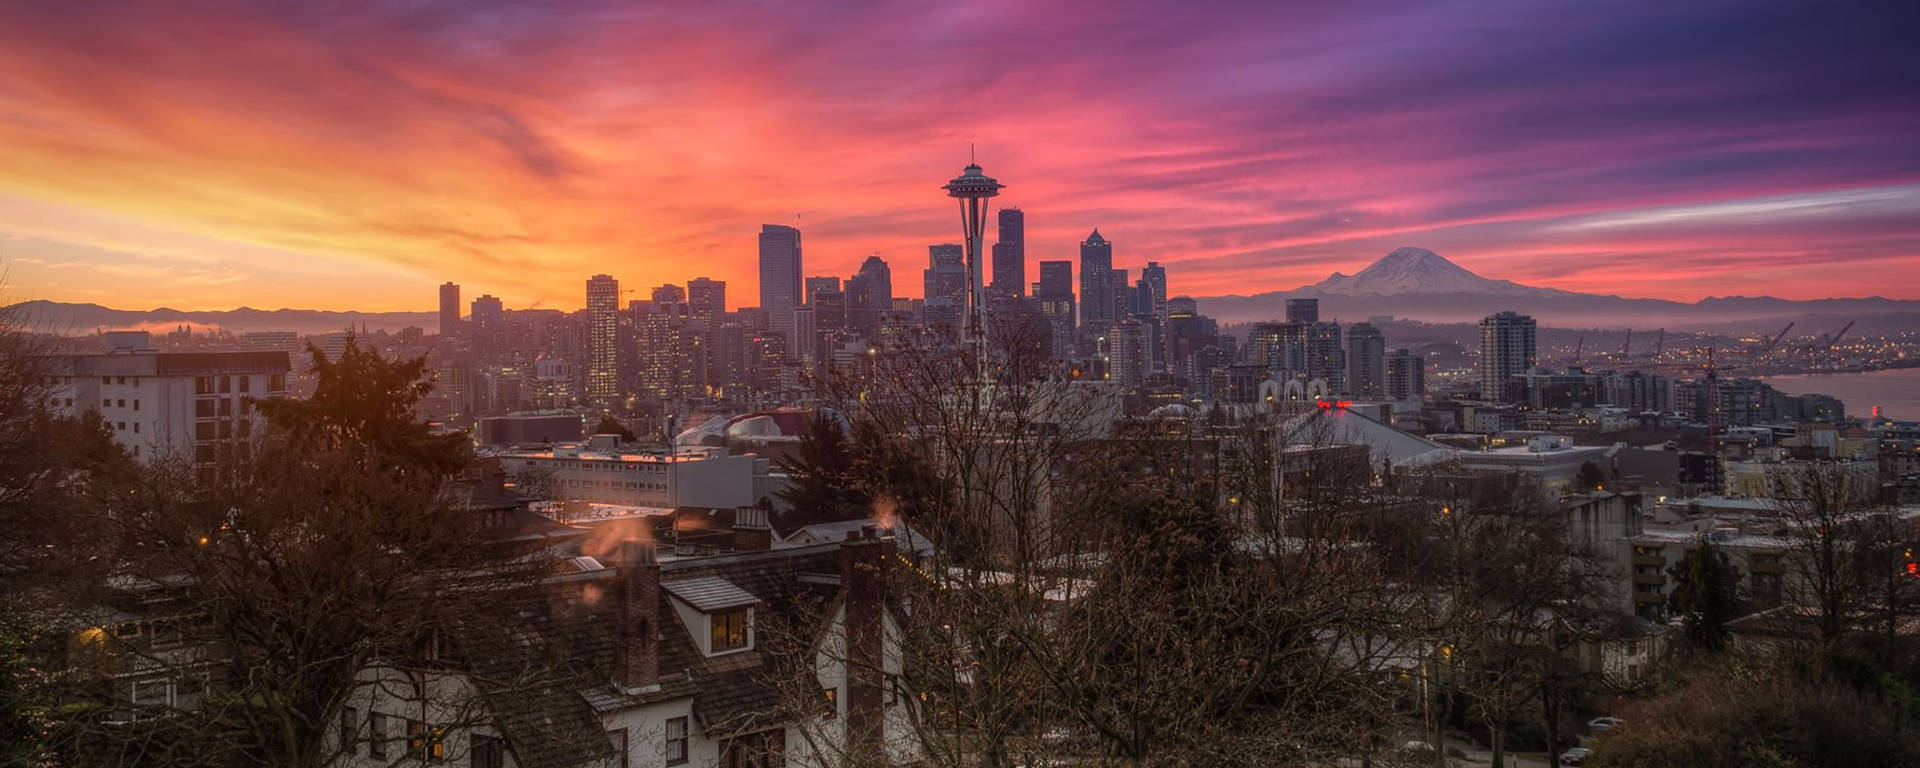 Seattle City During Sunset Wallpaper